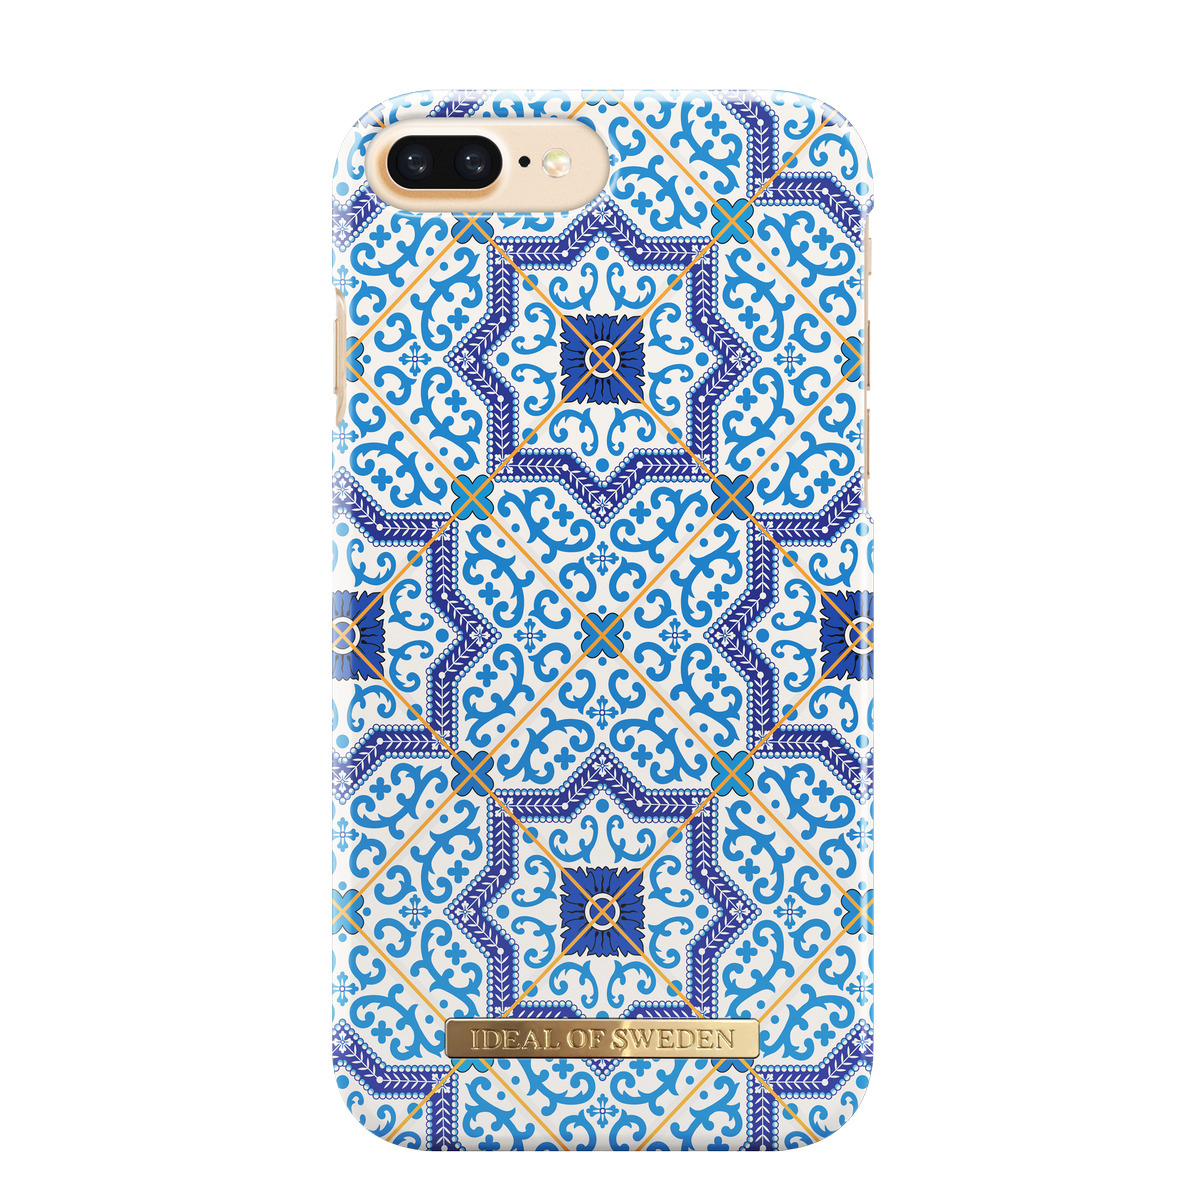 8 OF 7 Backcover, ,iPhone iPhone Marrakech Fashion, SWEDEN 6 iPhone Plus Plus, IDEAL Plus, Apple,